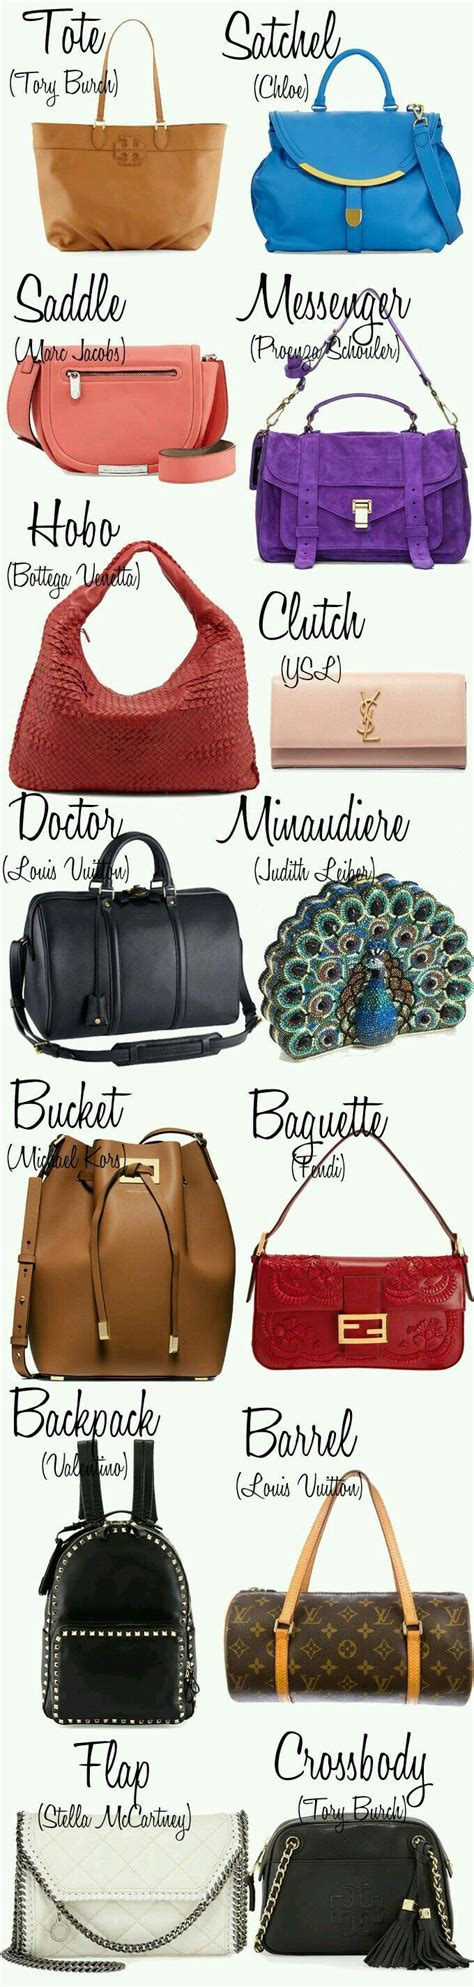 Different Types Of Purses And Their Names Paul Smith